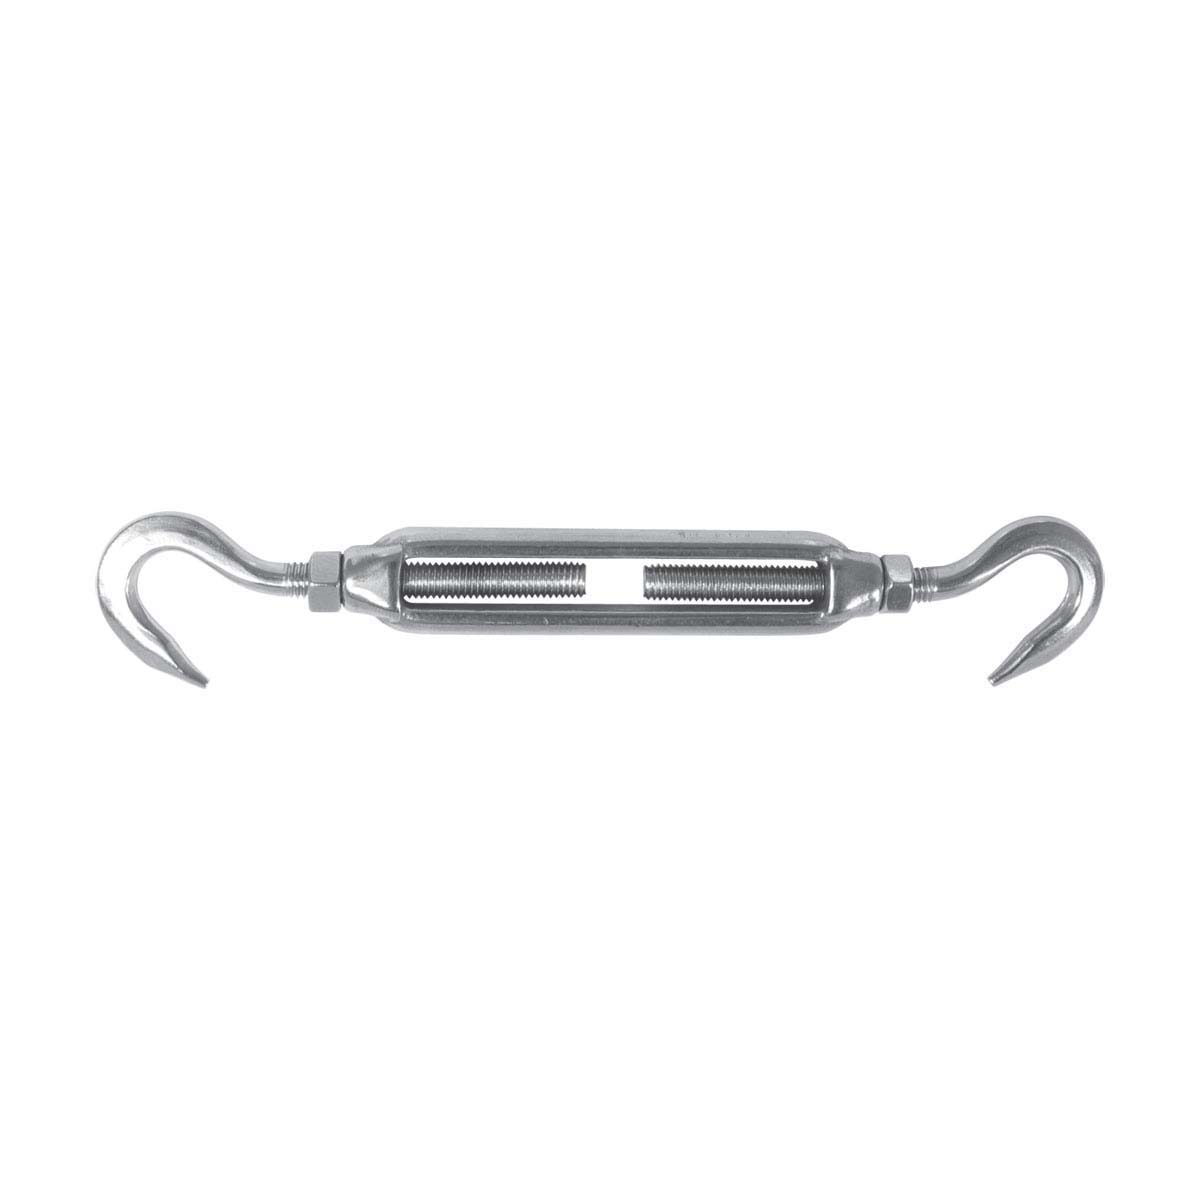 BLA 316 Stainless Steel Hook and Hook Open Body Turnbuckle